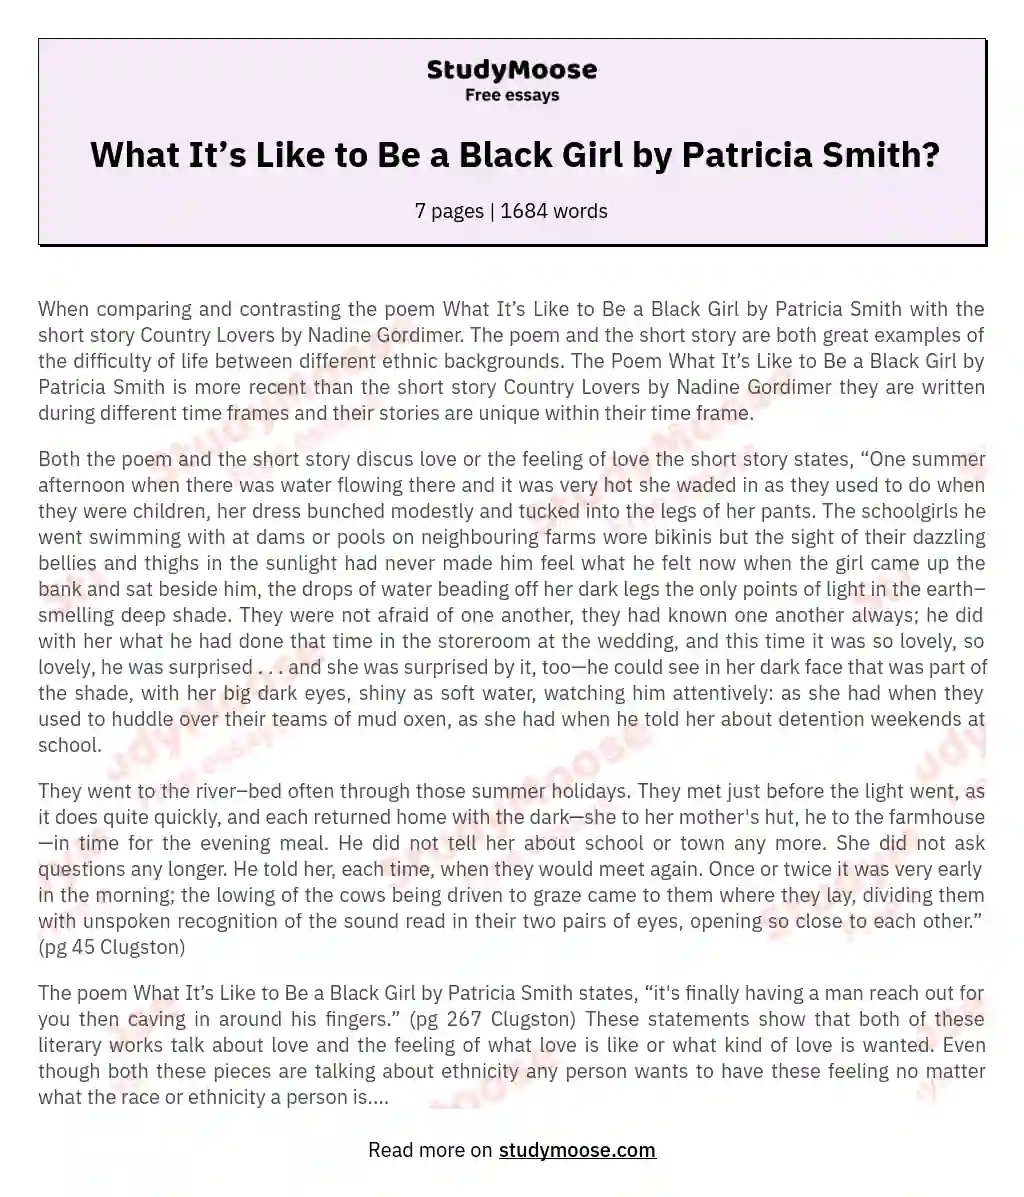 What It’s Like to Be a Black Girl by Patricia Smith?